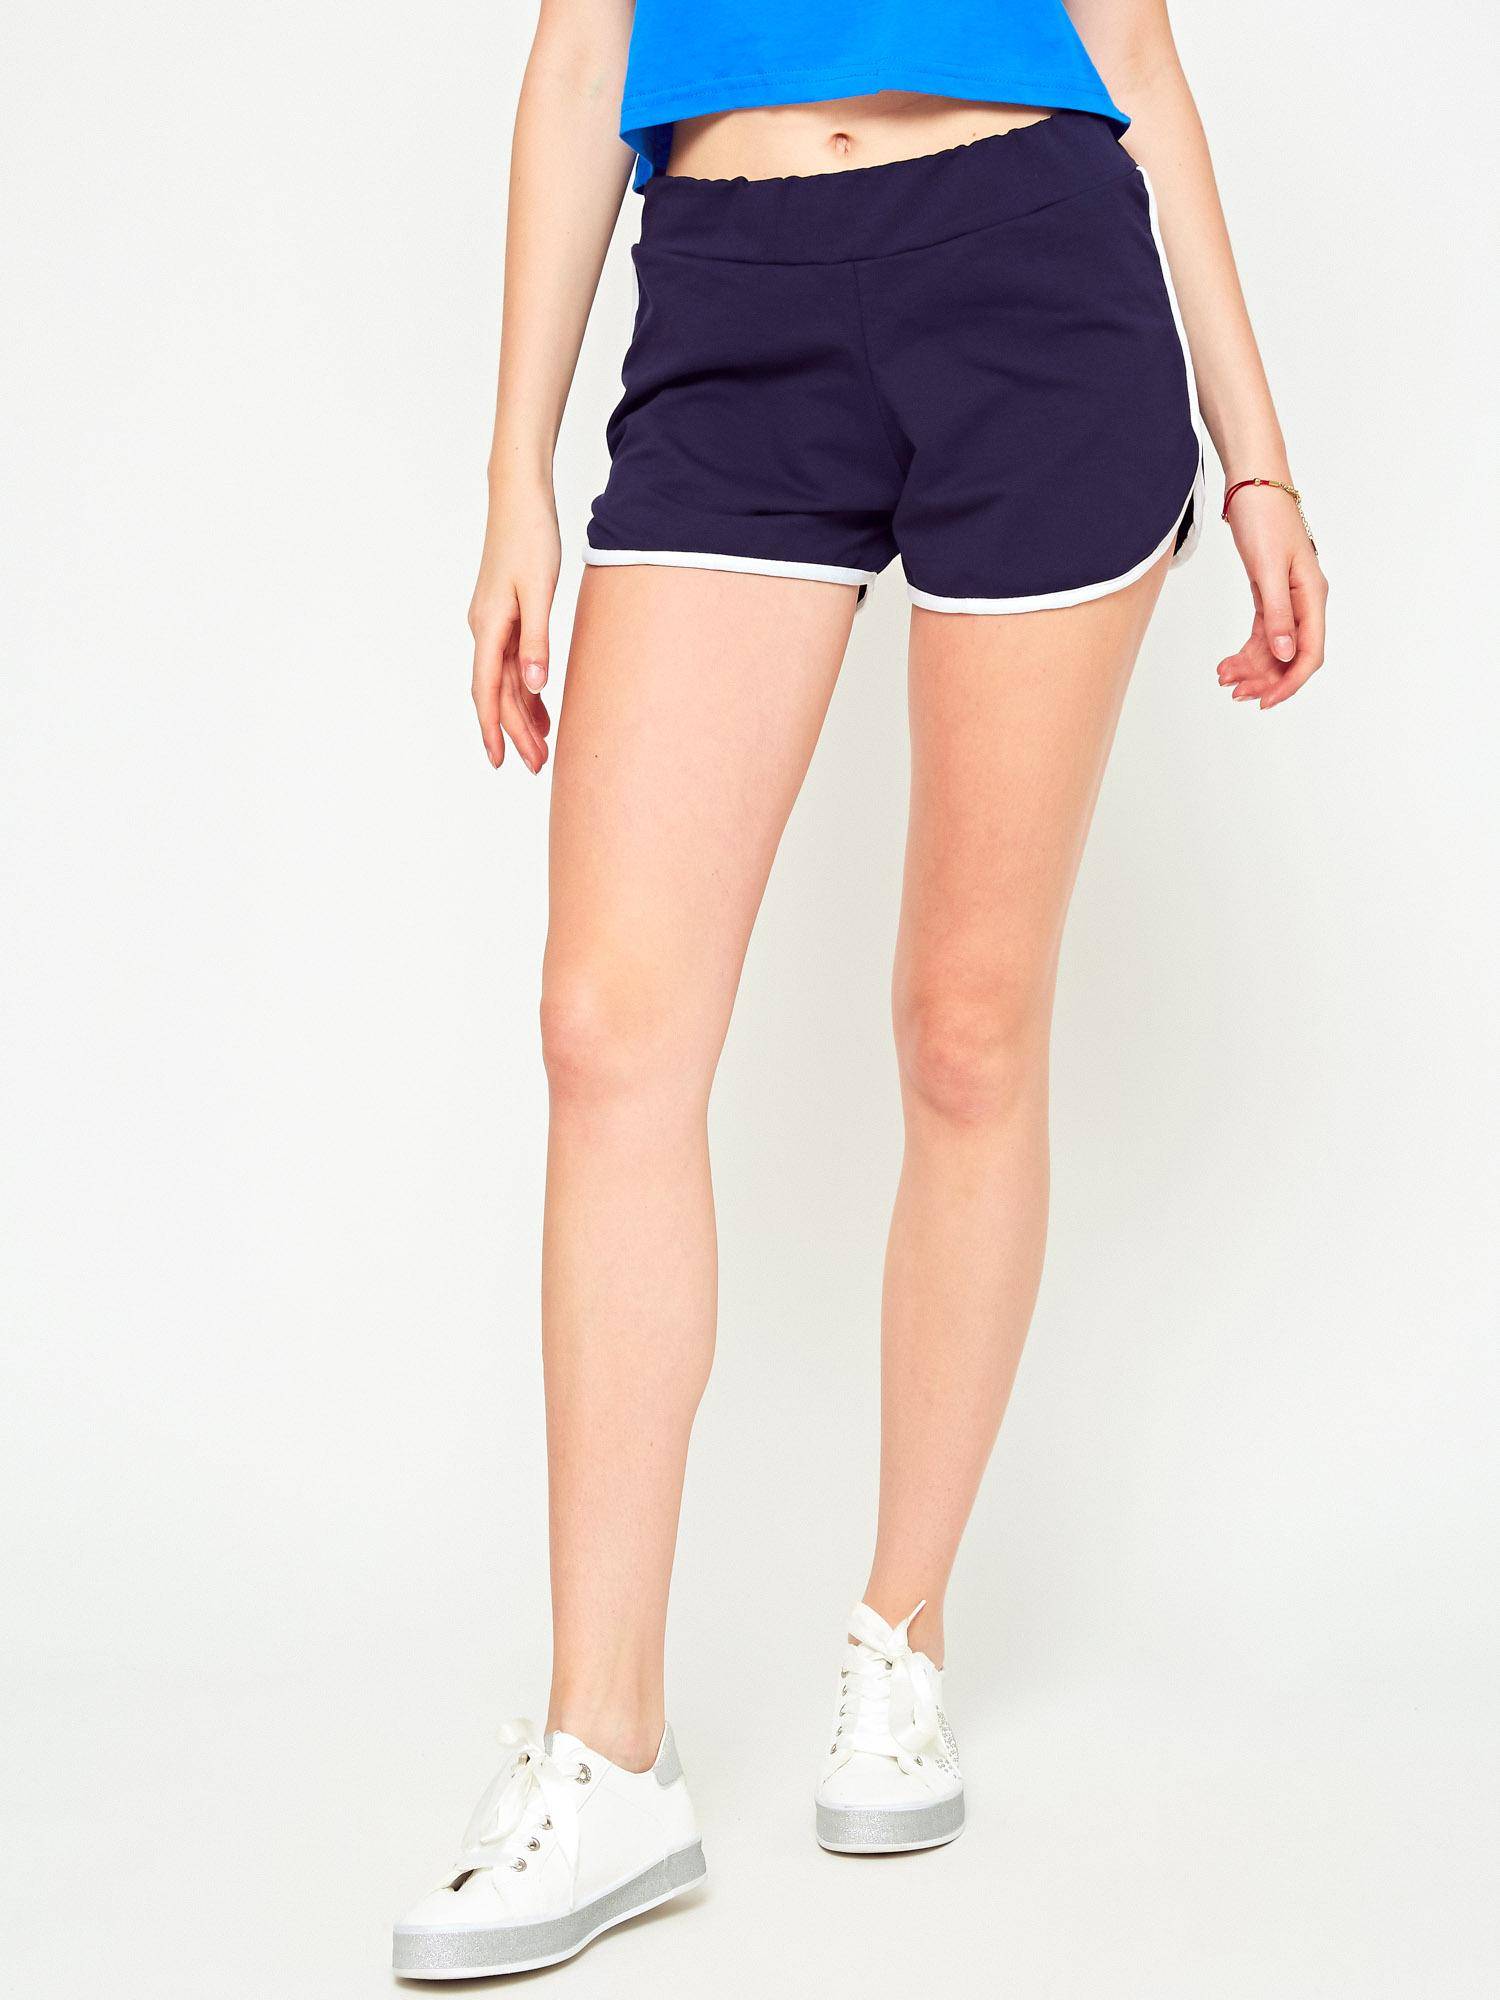 Sports Shorts With Contrasting Trimming Navy Blue